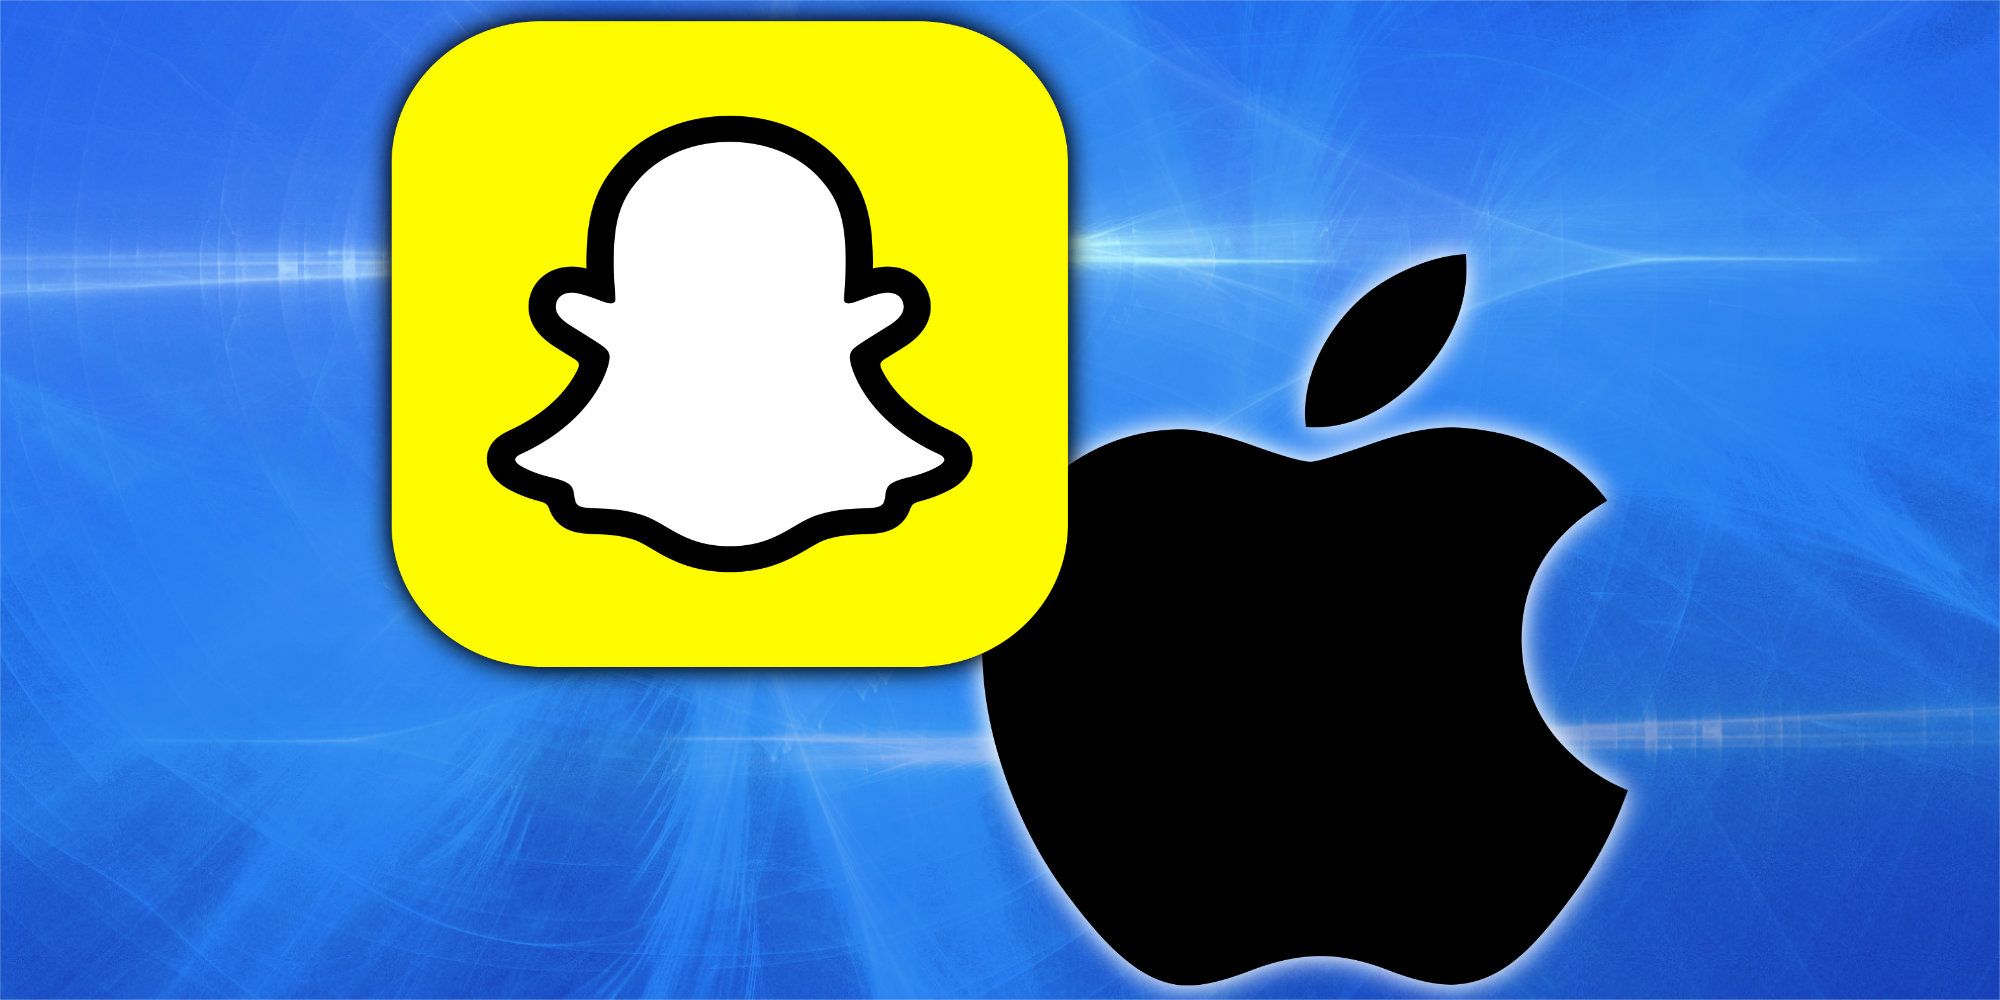 is there a way to download snapchat on mac